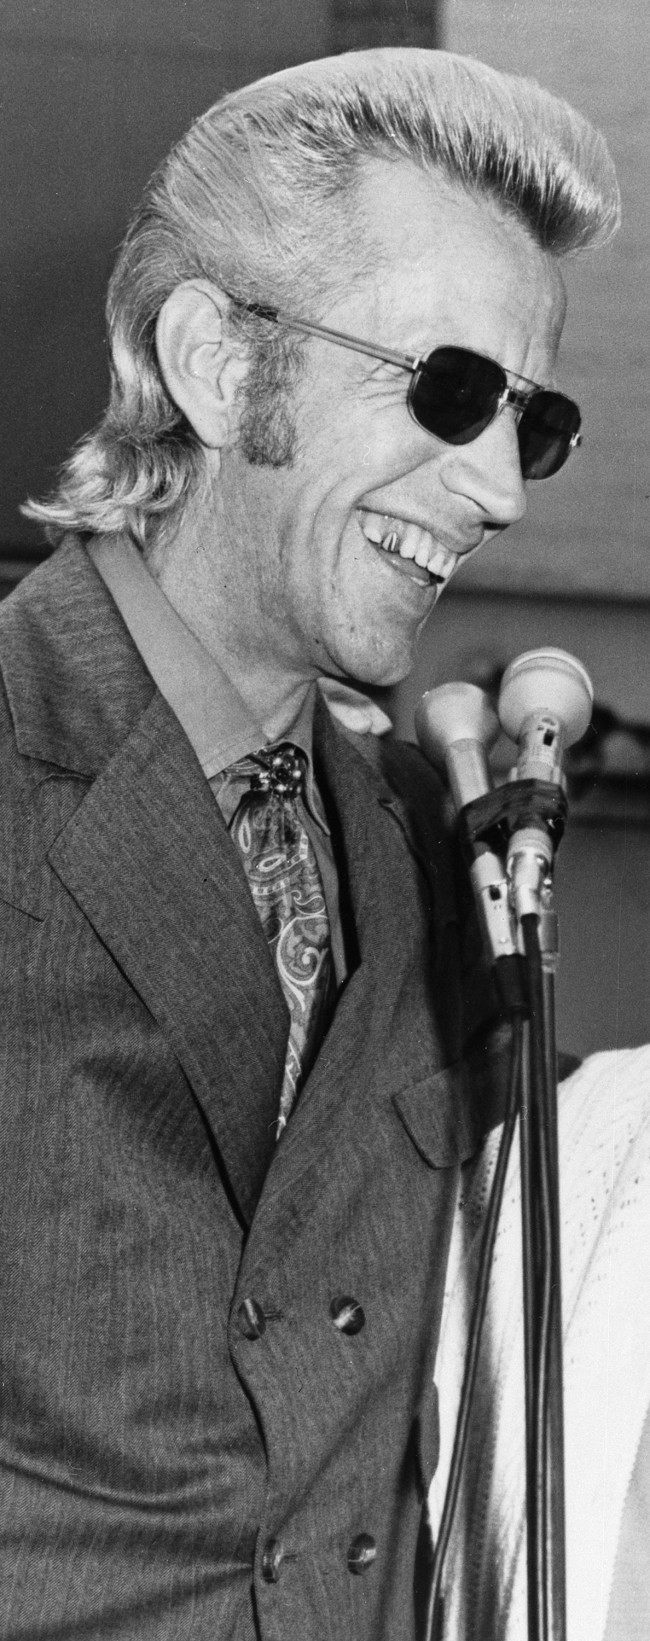 Country music singer Porter Wagoner is shown in West Plains, Mo., Sept. 25, 1971.